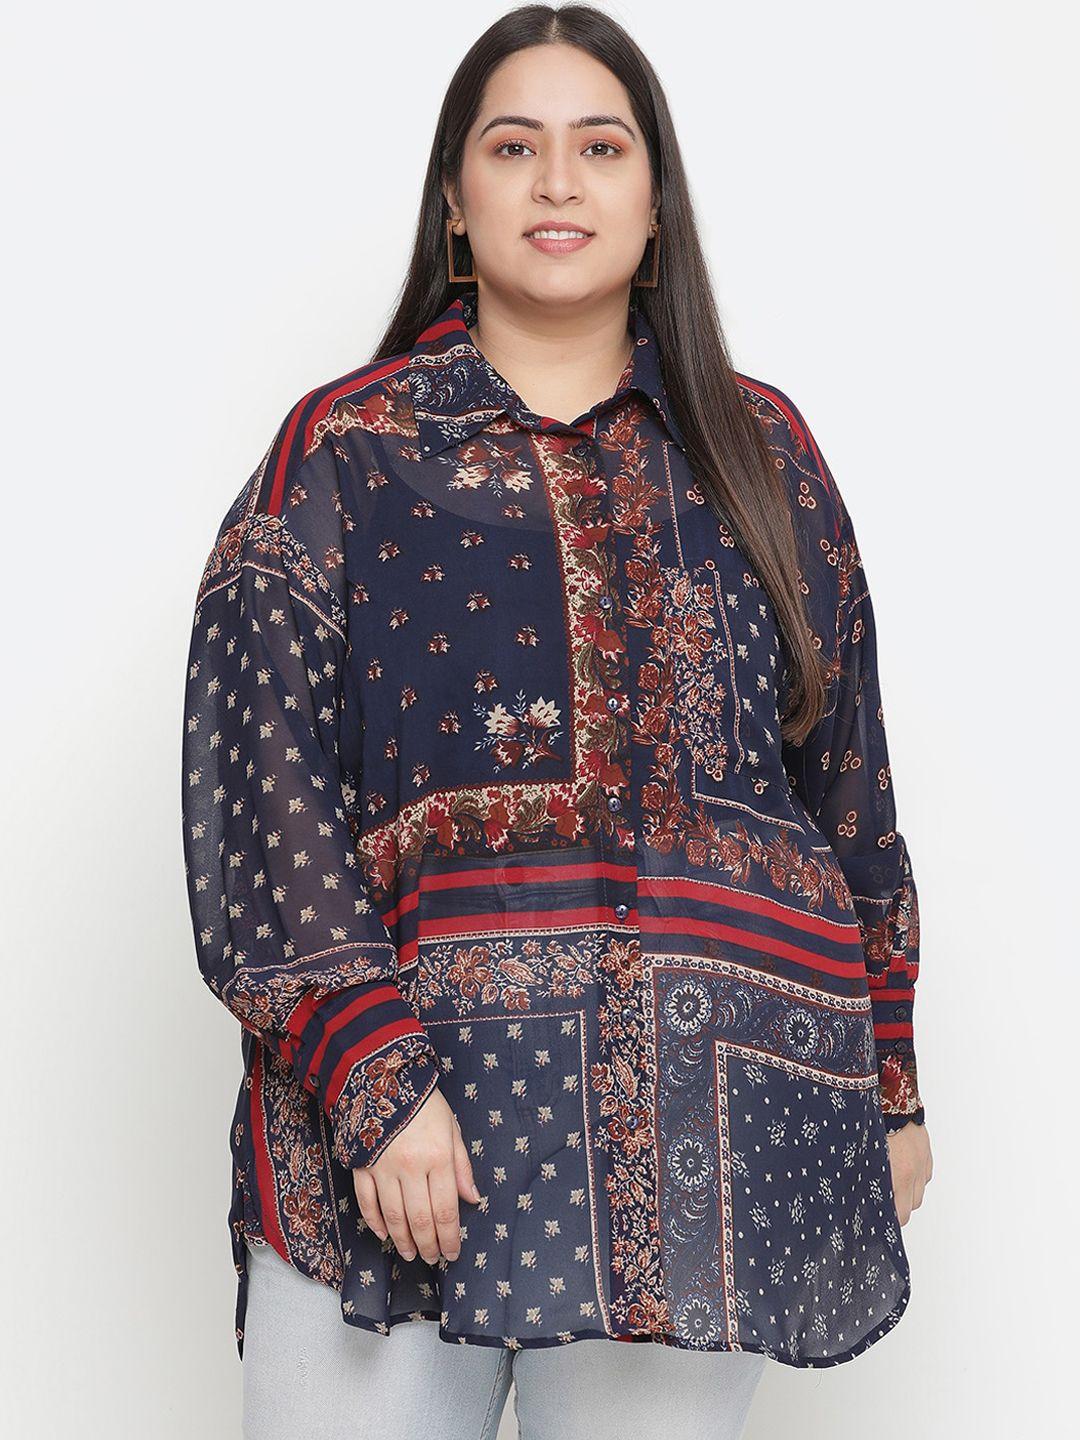 Oxolloxo Women Plus Size Navy Blue & Red Comfort Printed Casual Shirt